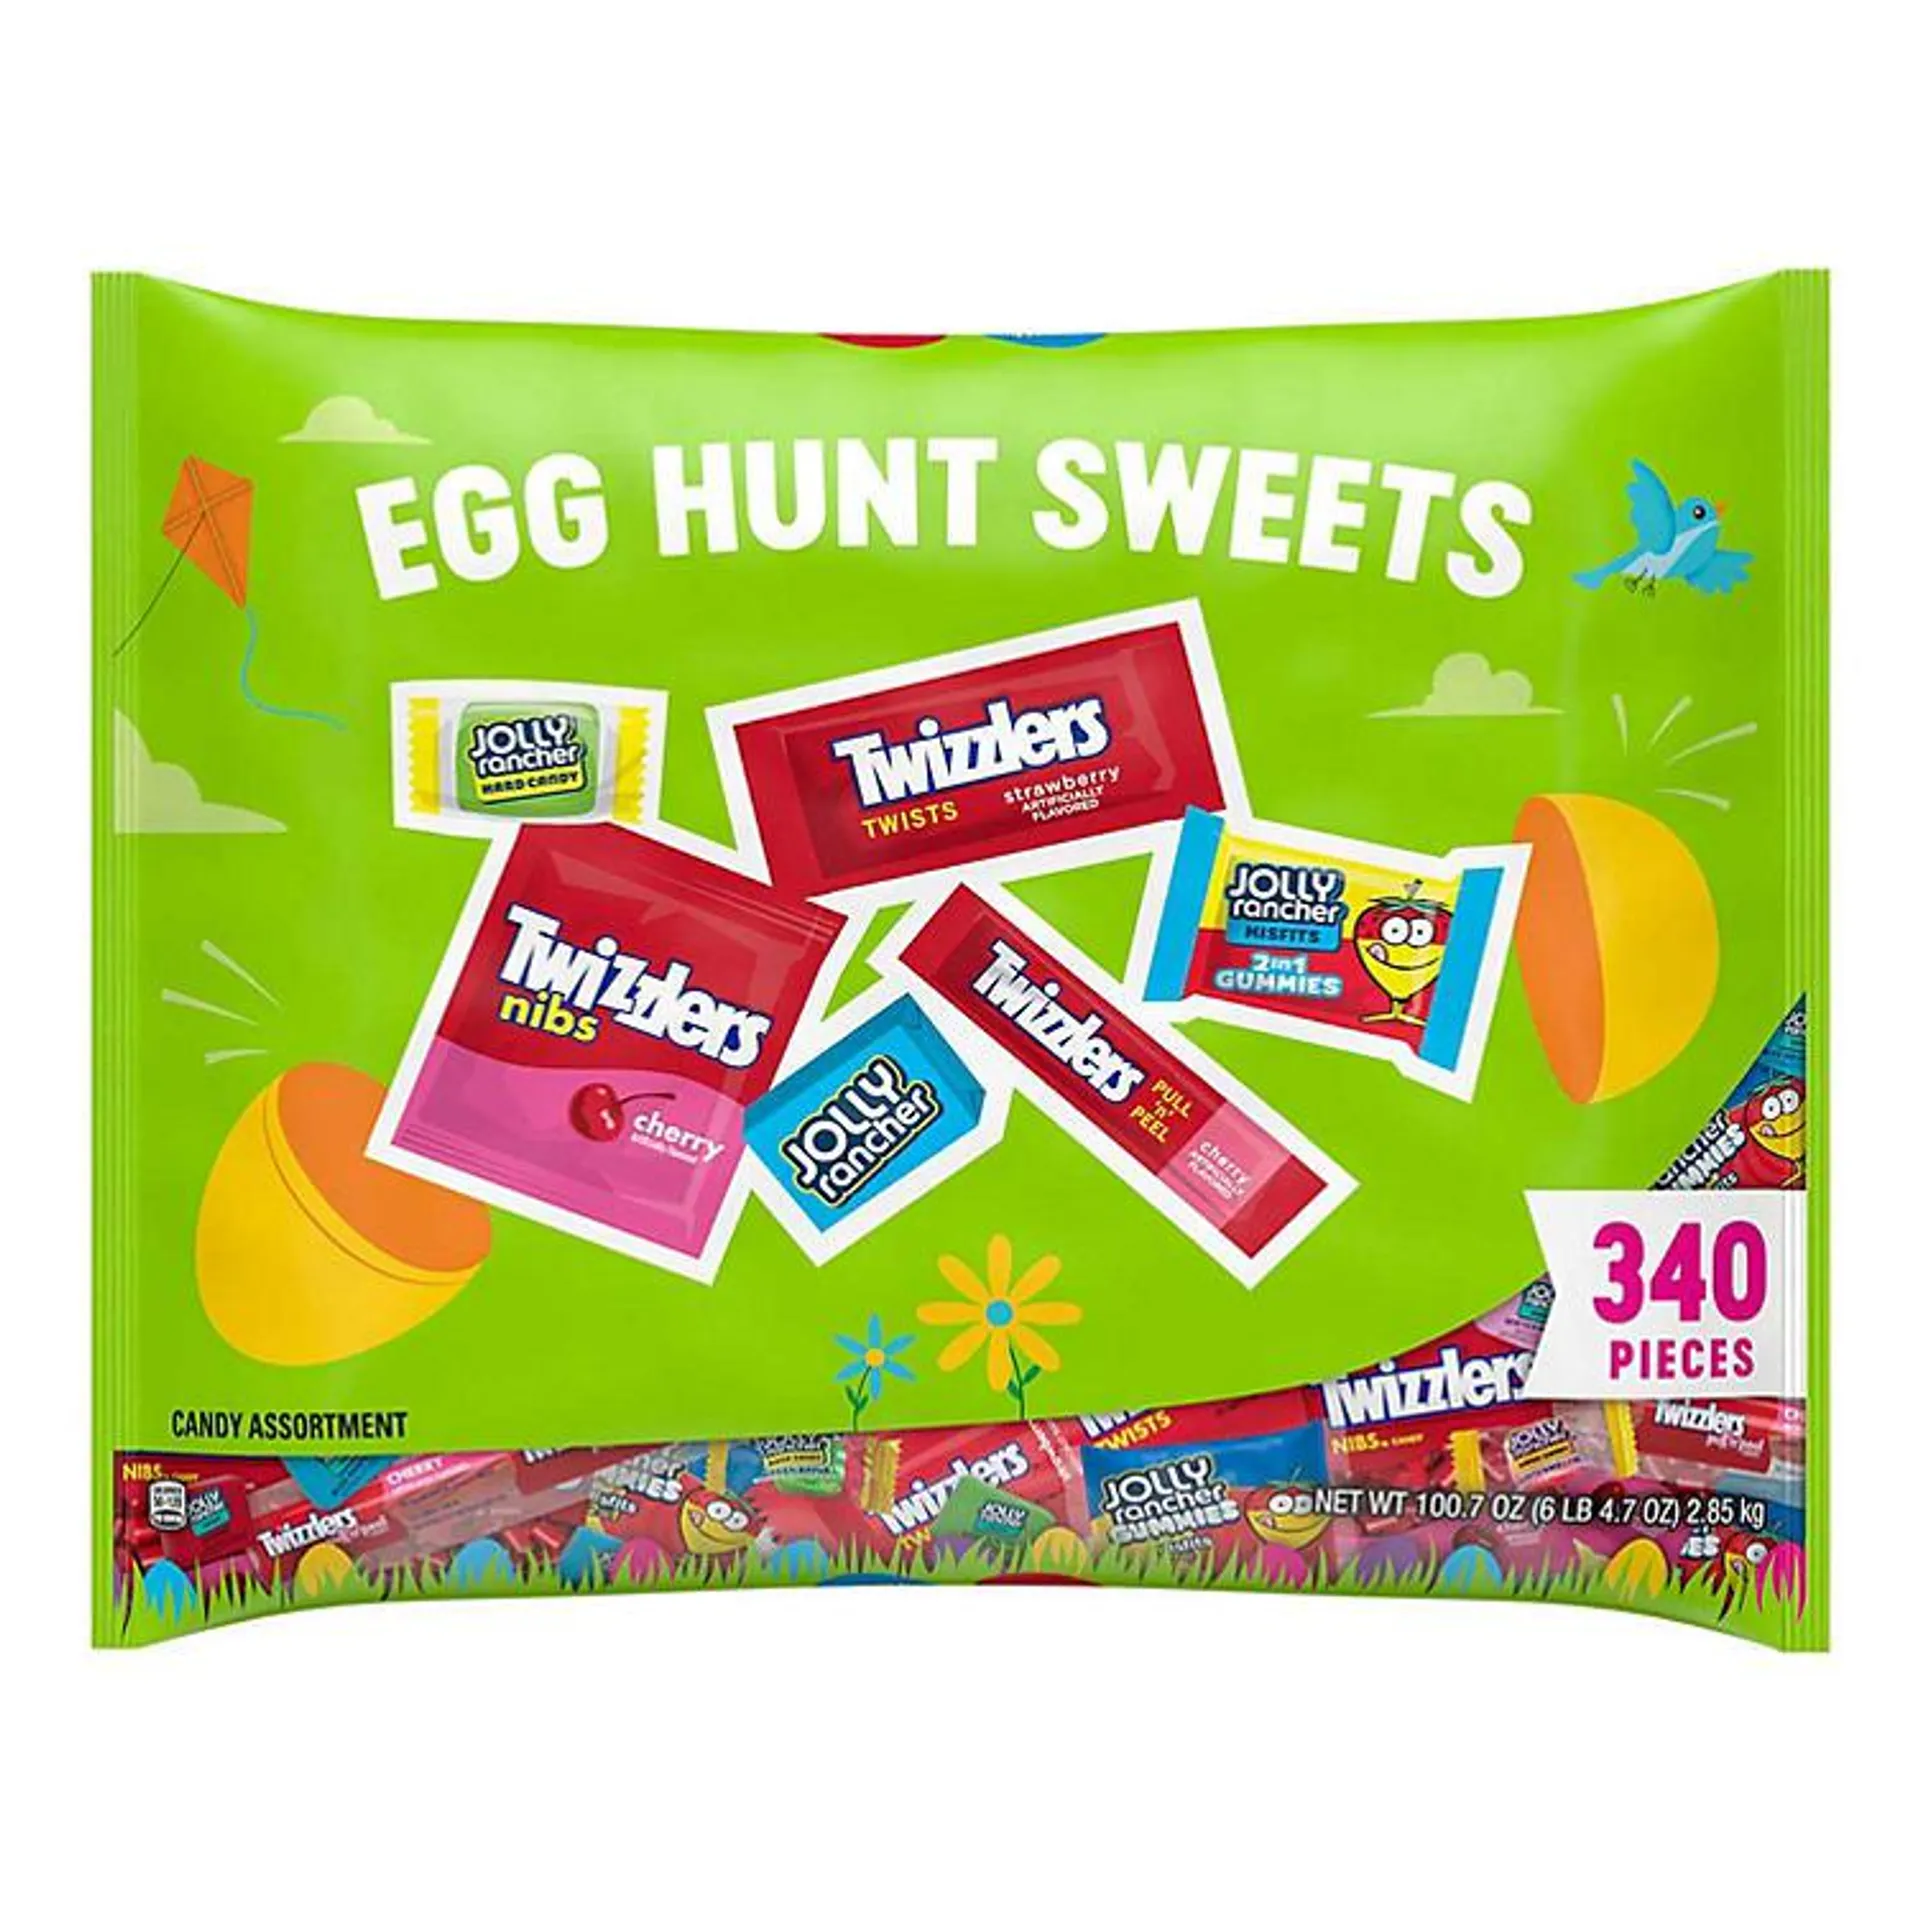 TWIZZLERS and JOLLY RANCHER Fruit Flavored Assortment Treats, Easter Candy, Bulk Variety Bag (100.7 oz., 340 pcs.)